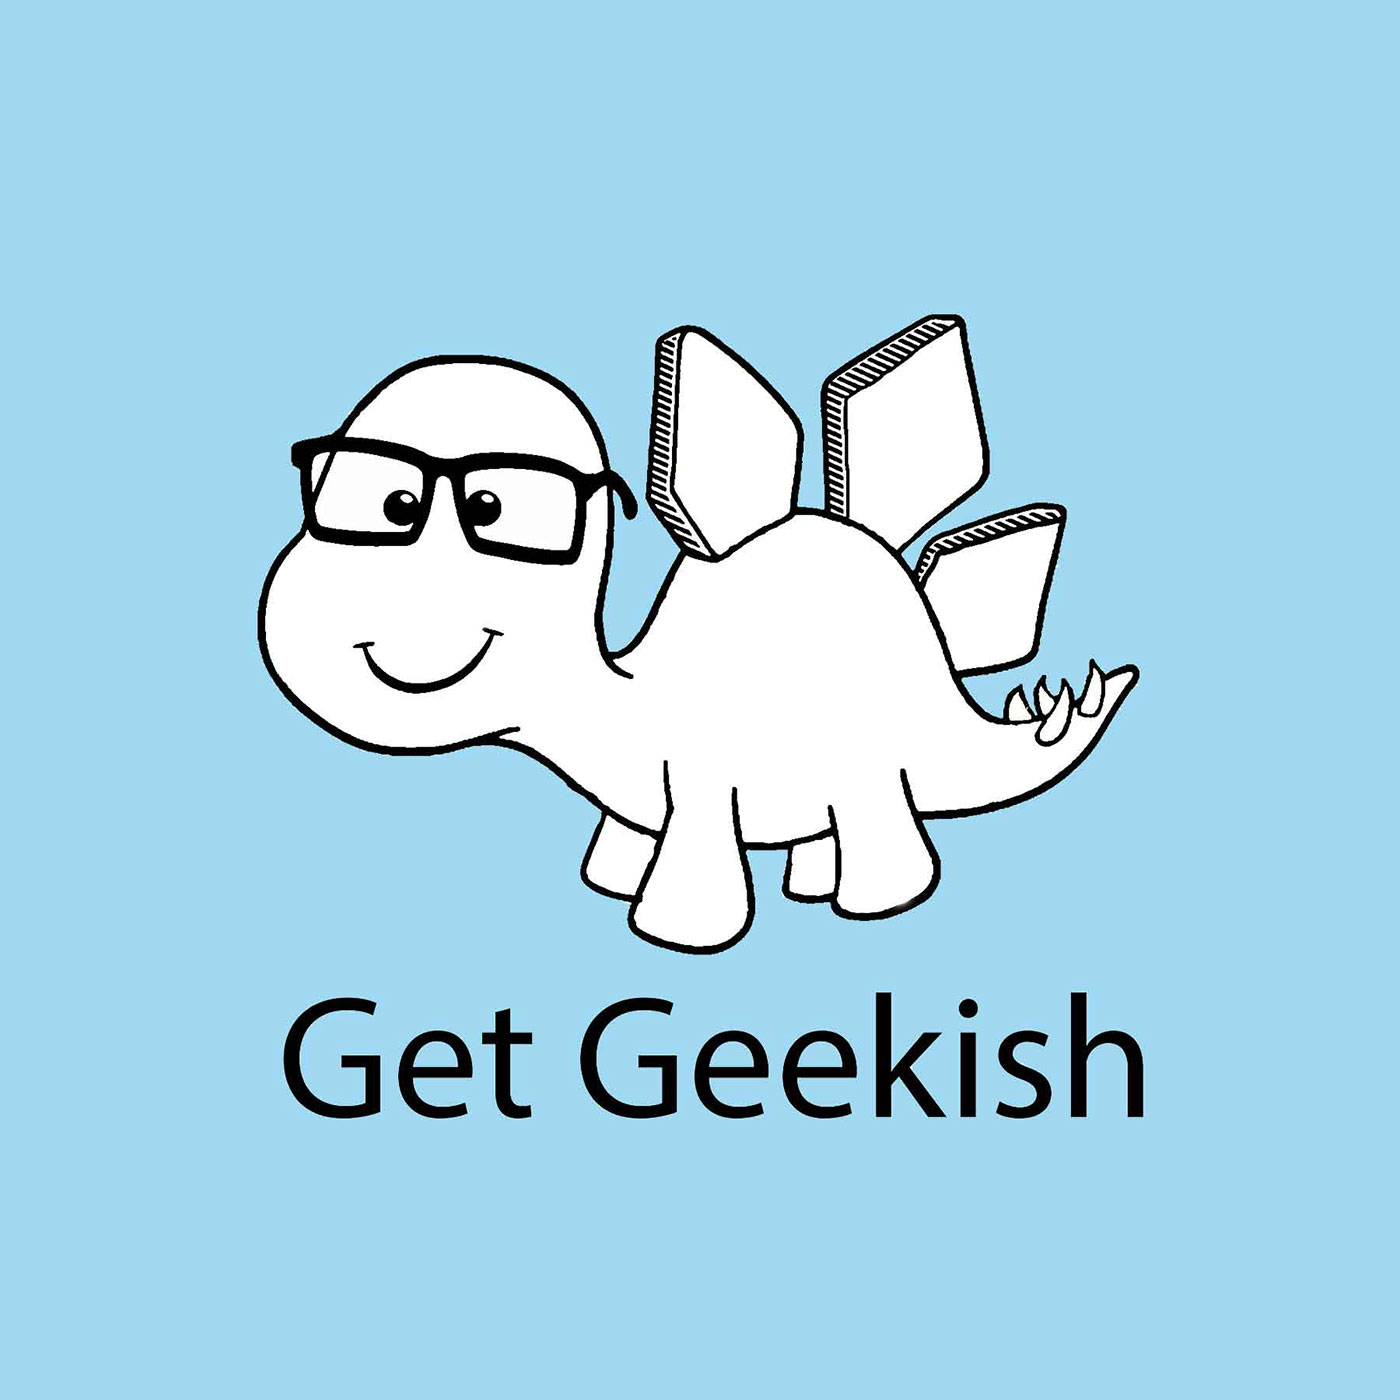 The Upcoming Con Season, Lessons Learned - Get Geekish - Episode 15, June 3, 2018